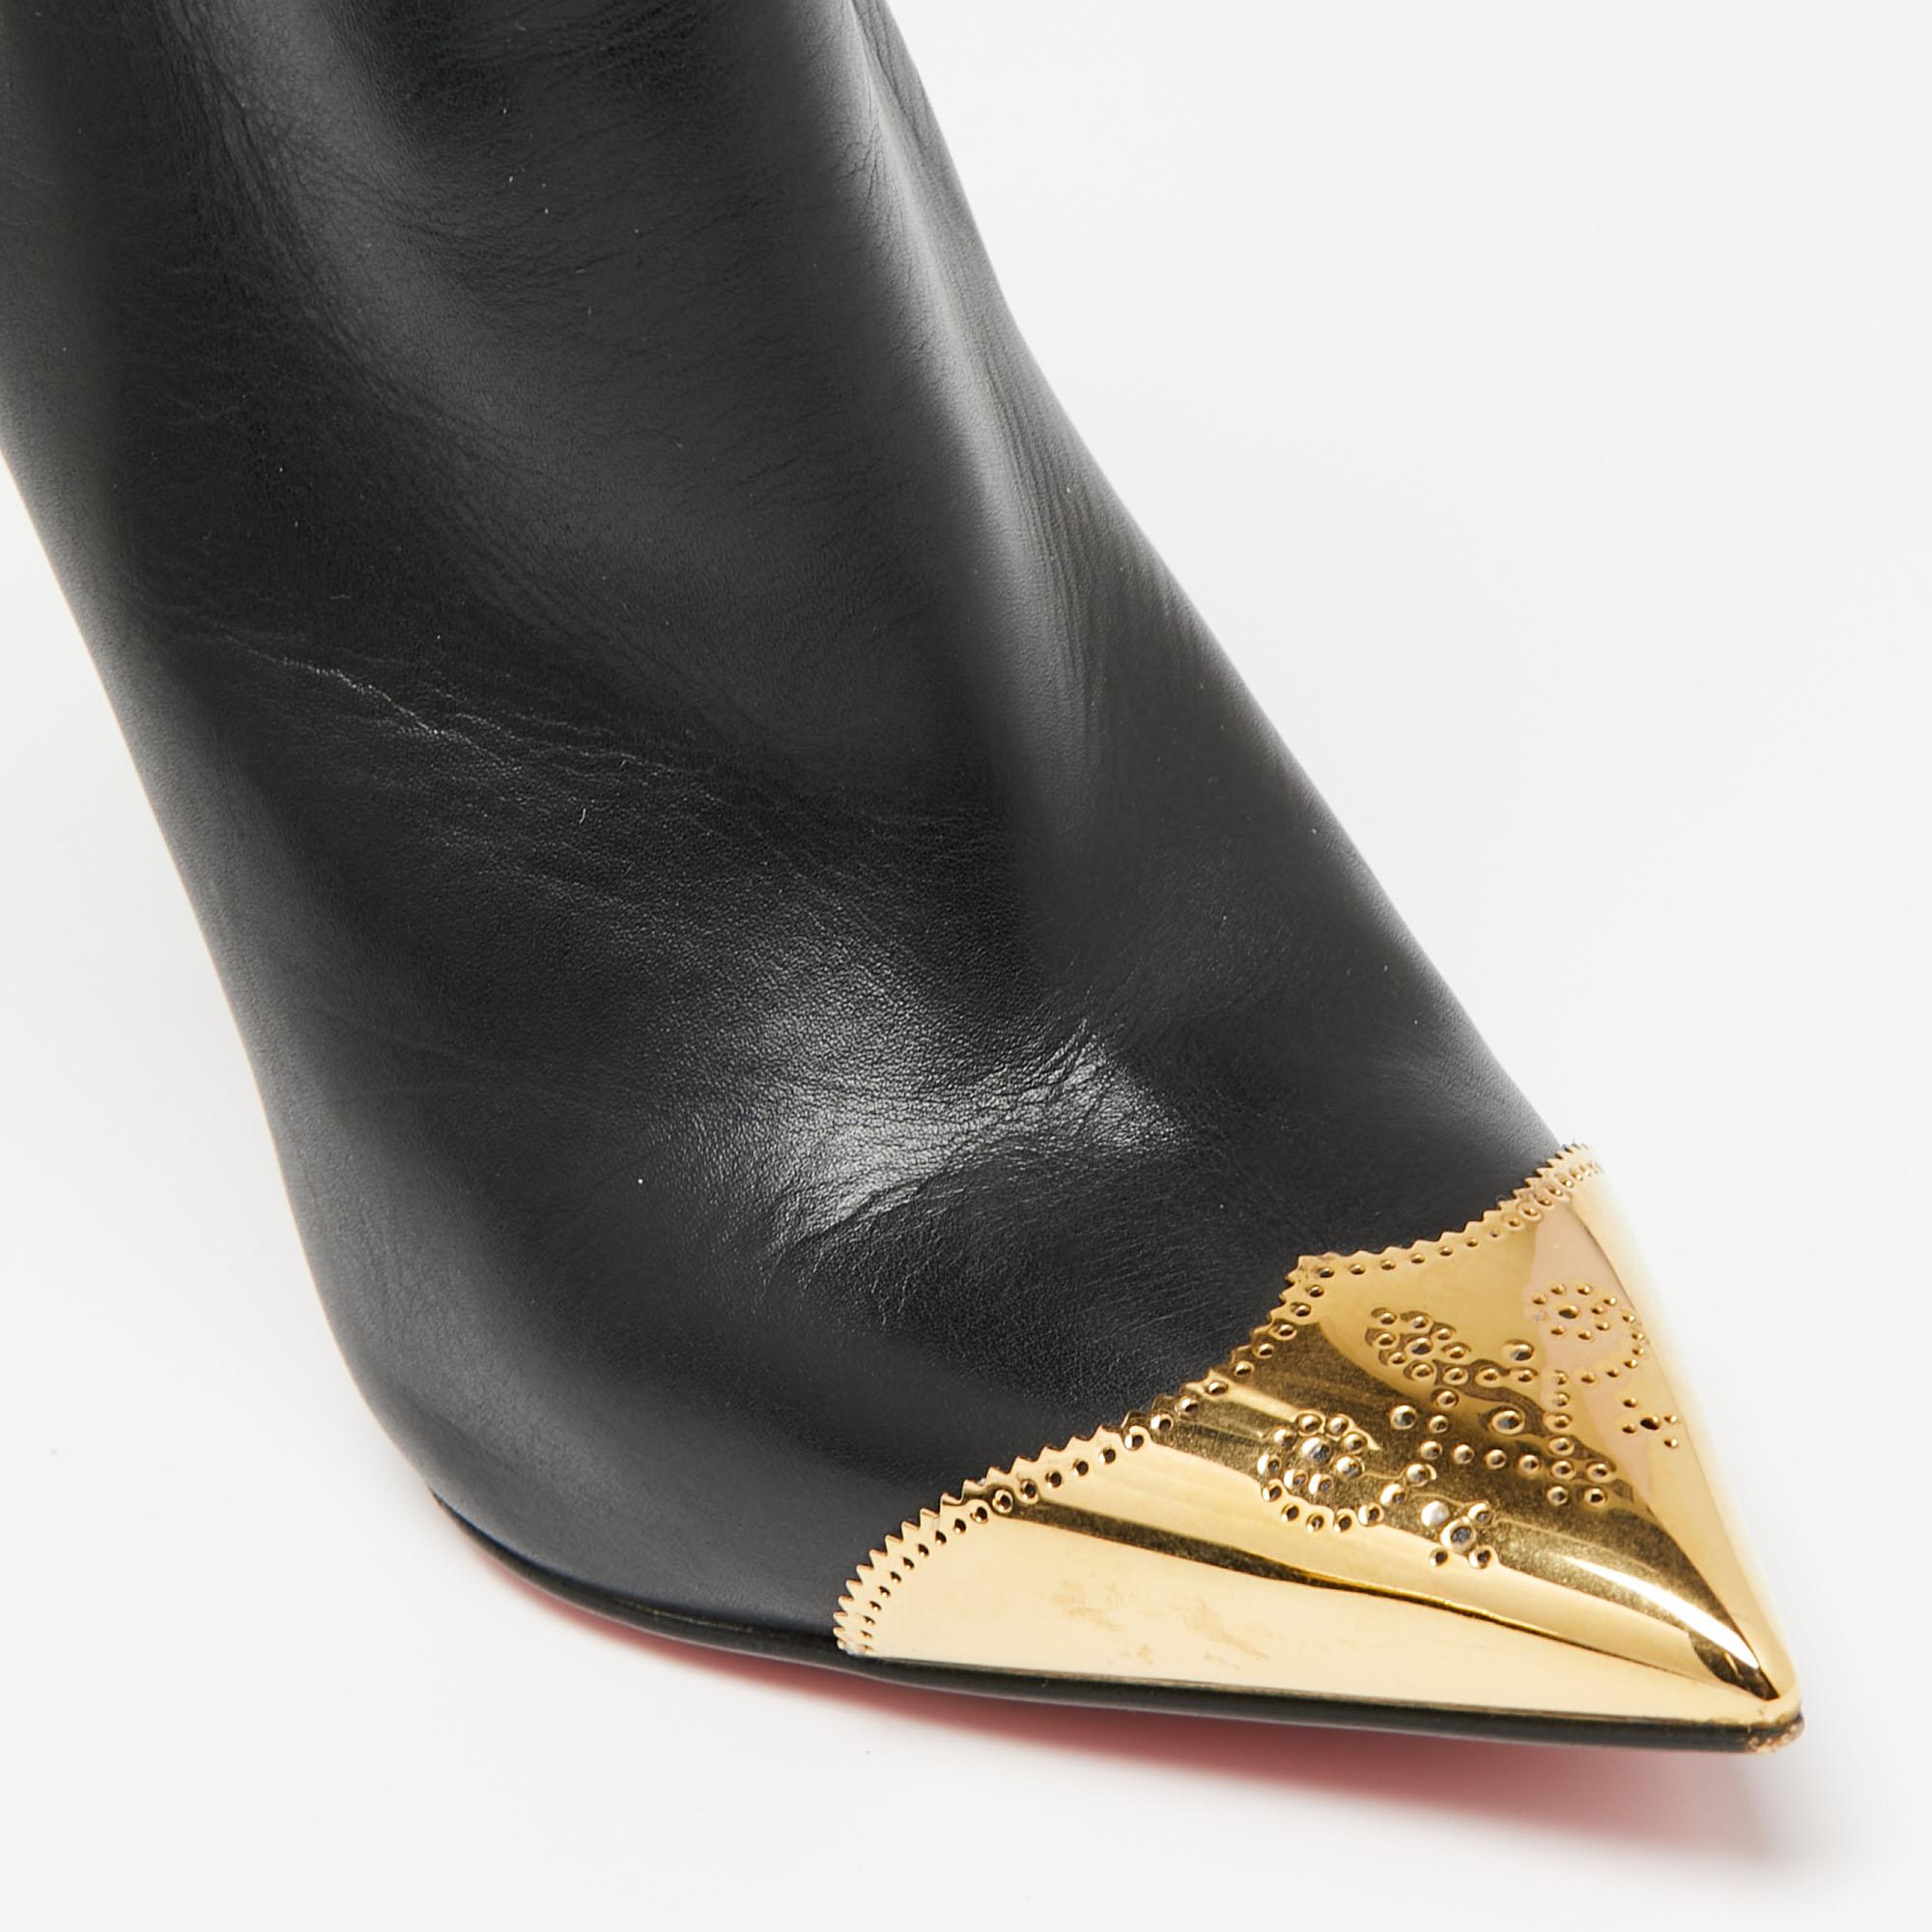 Christian Louboutin Black Leather Calamijane Pointed-Toe Ankle Booties Size 35.5 For Sale 2